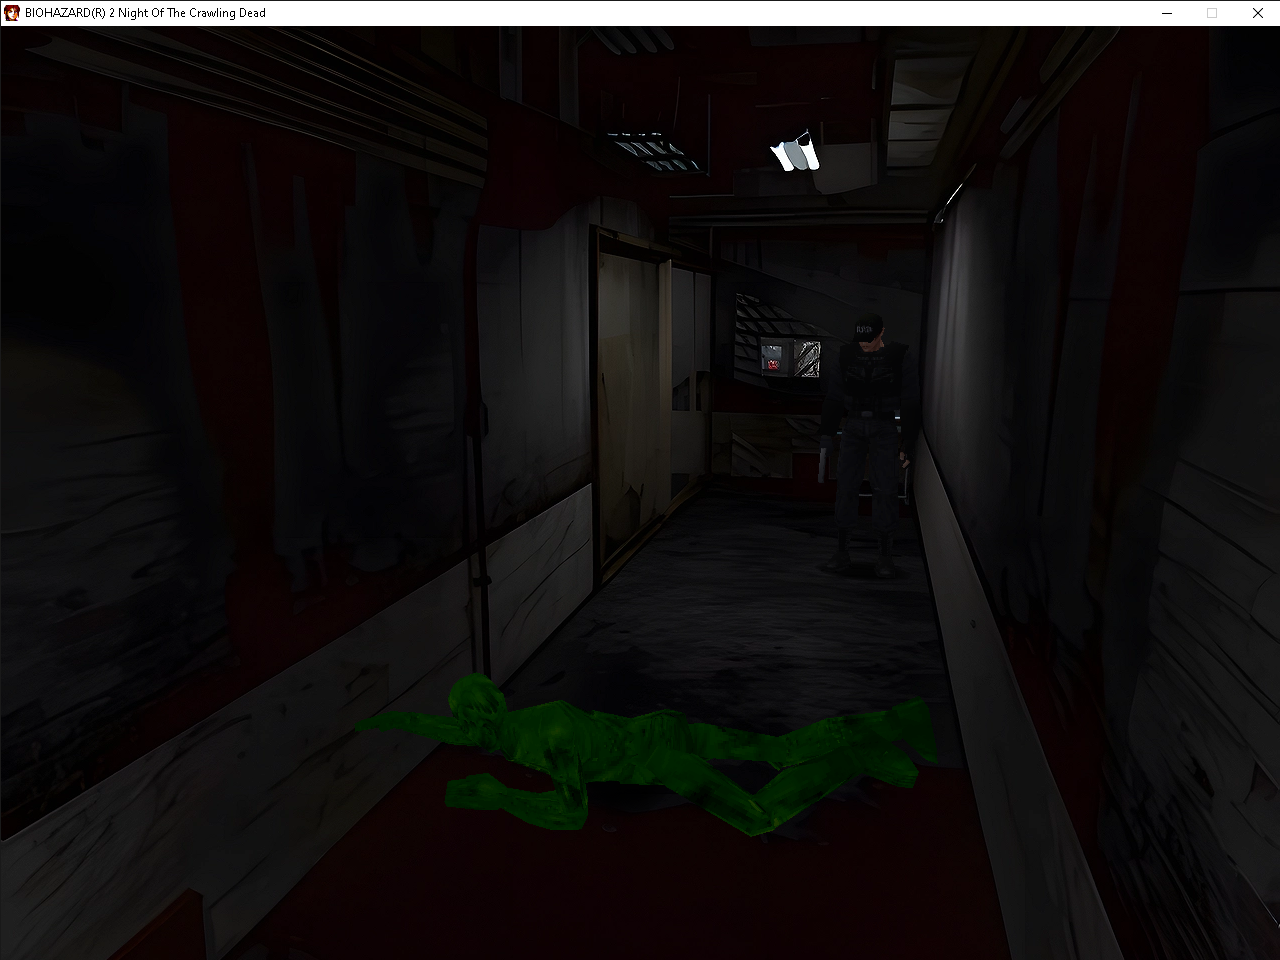 New Updates Image Resident Evil 2 Night Of The Crawling Dead Mod For Resident Evil 2 Moddb 9315